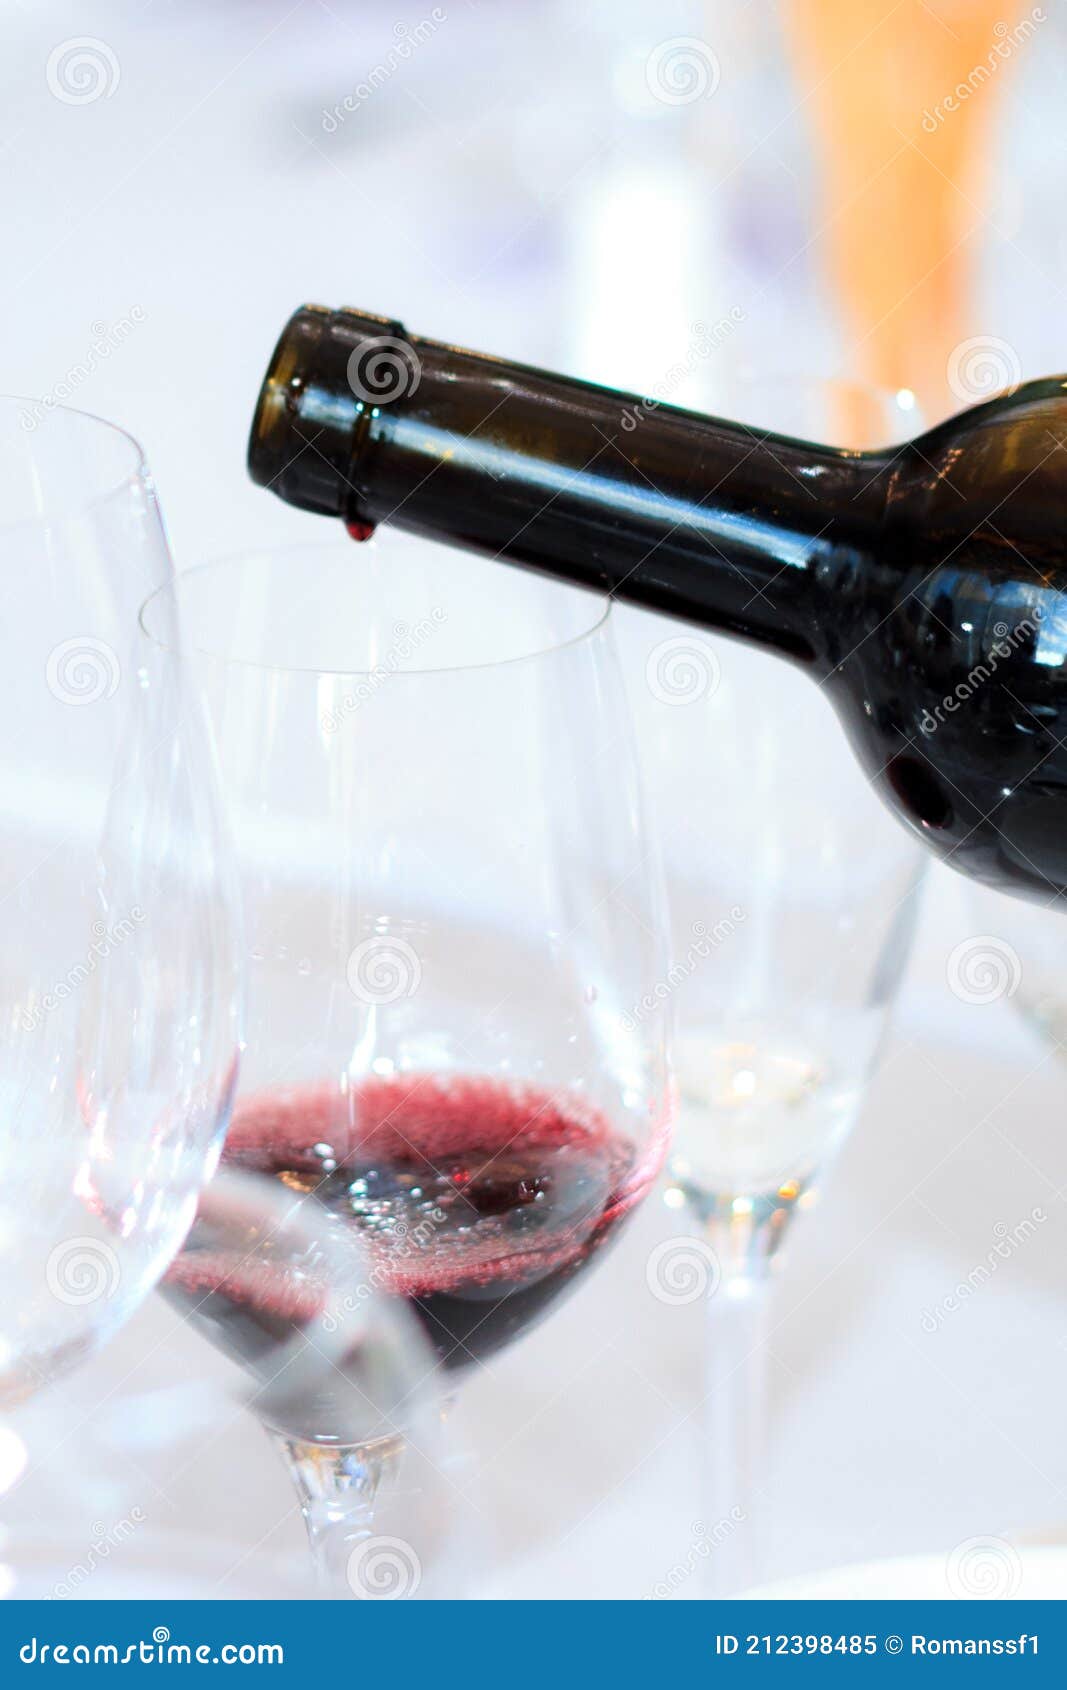 https://thumbs.dreamstime.com/z/restaurant-red-wine-poured-glass-wine-bubbling-glass-nearby-other-empty-wine-glasses-wine-has-212398485.jpg